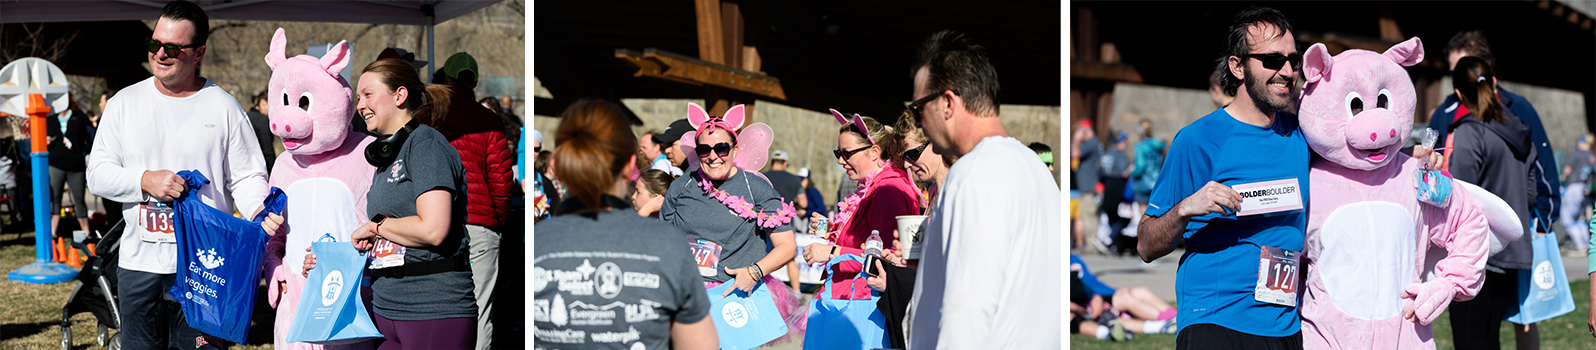 three photos from flying pig 5k 2019. Two are with the flying pig mascot, and the middle image shows runners dressed up with pig ears, wings and pink tutus. 